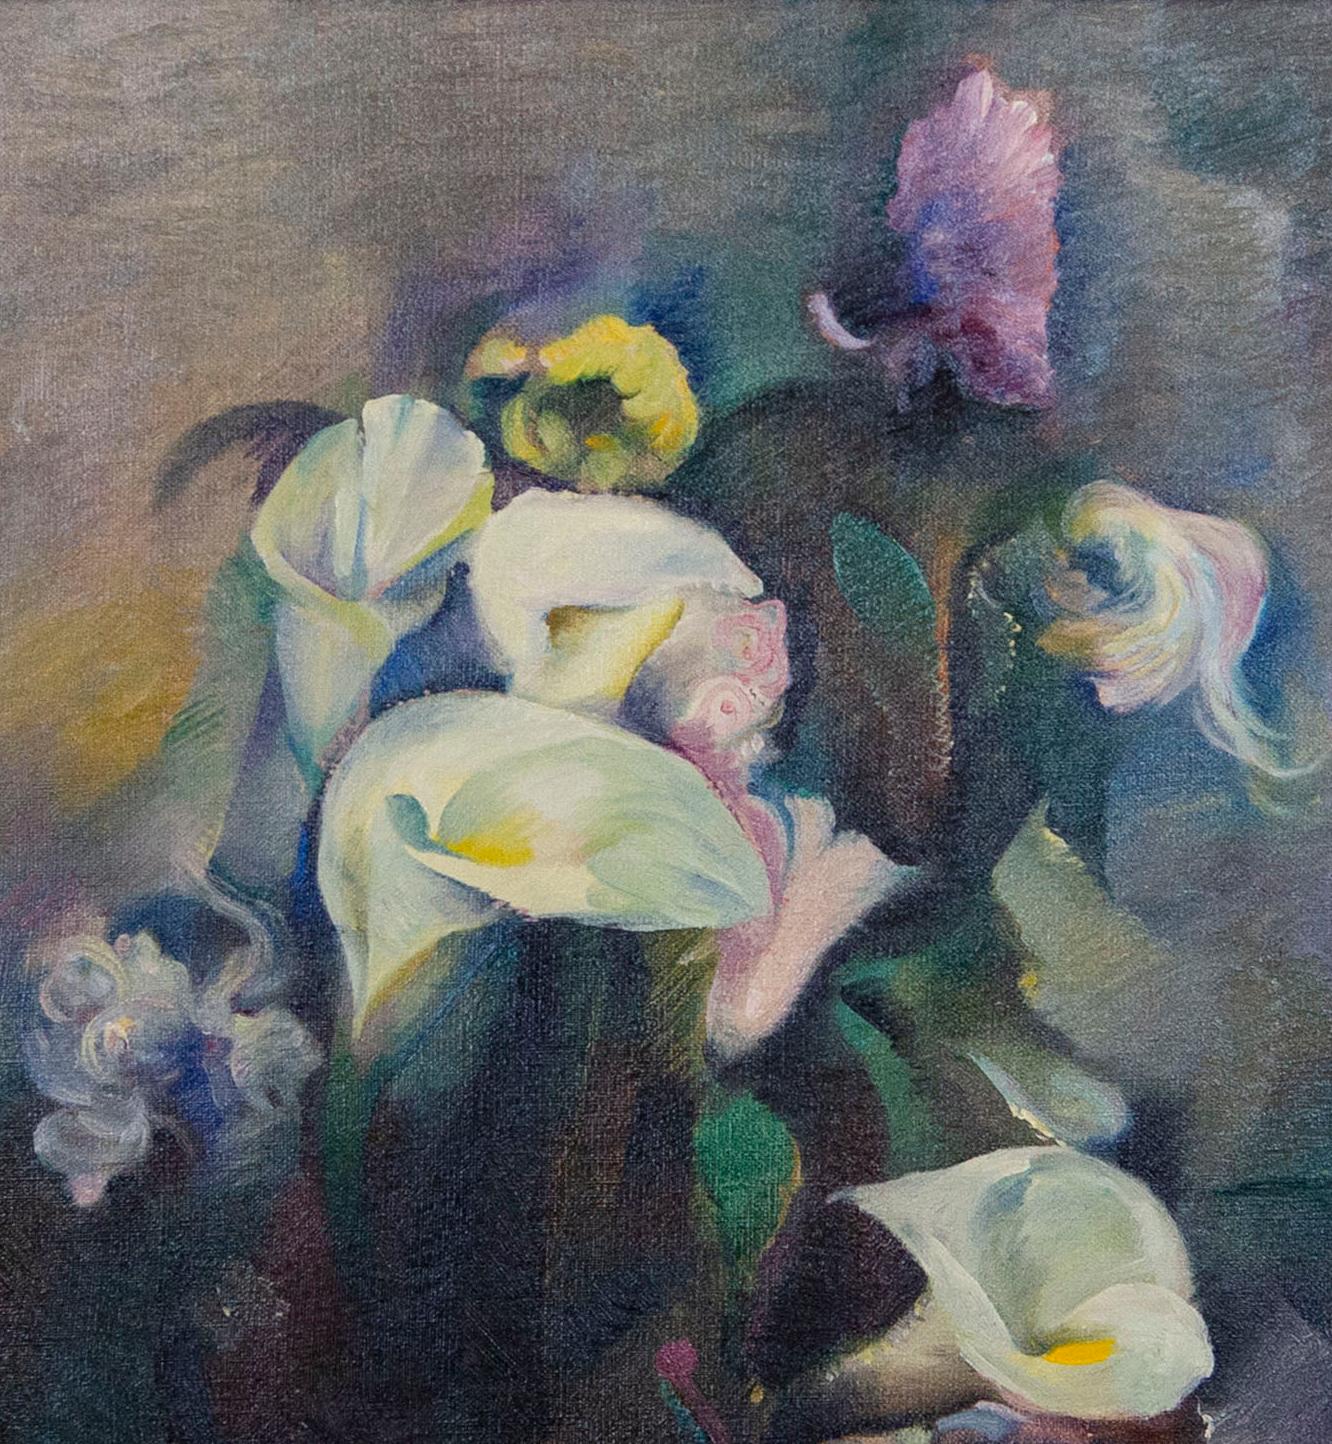 Calla Lilies, Abstract Modern Still Life - Painting by Sarkis Katchadourian